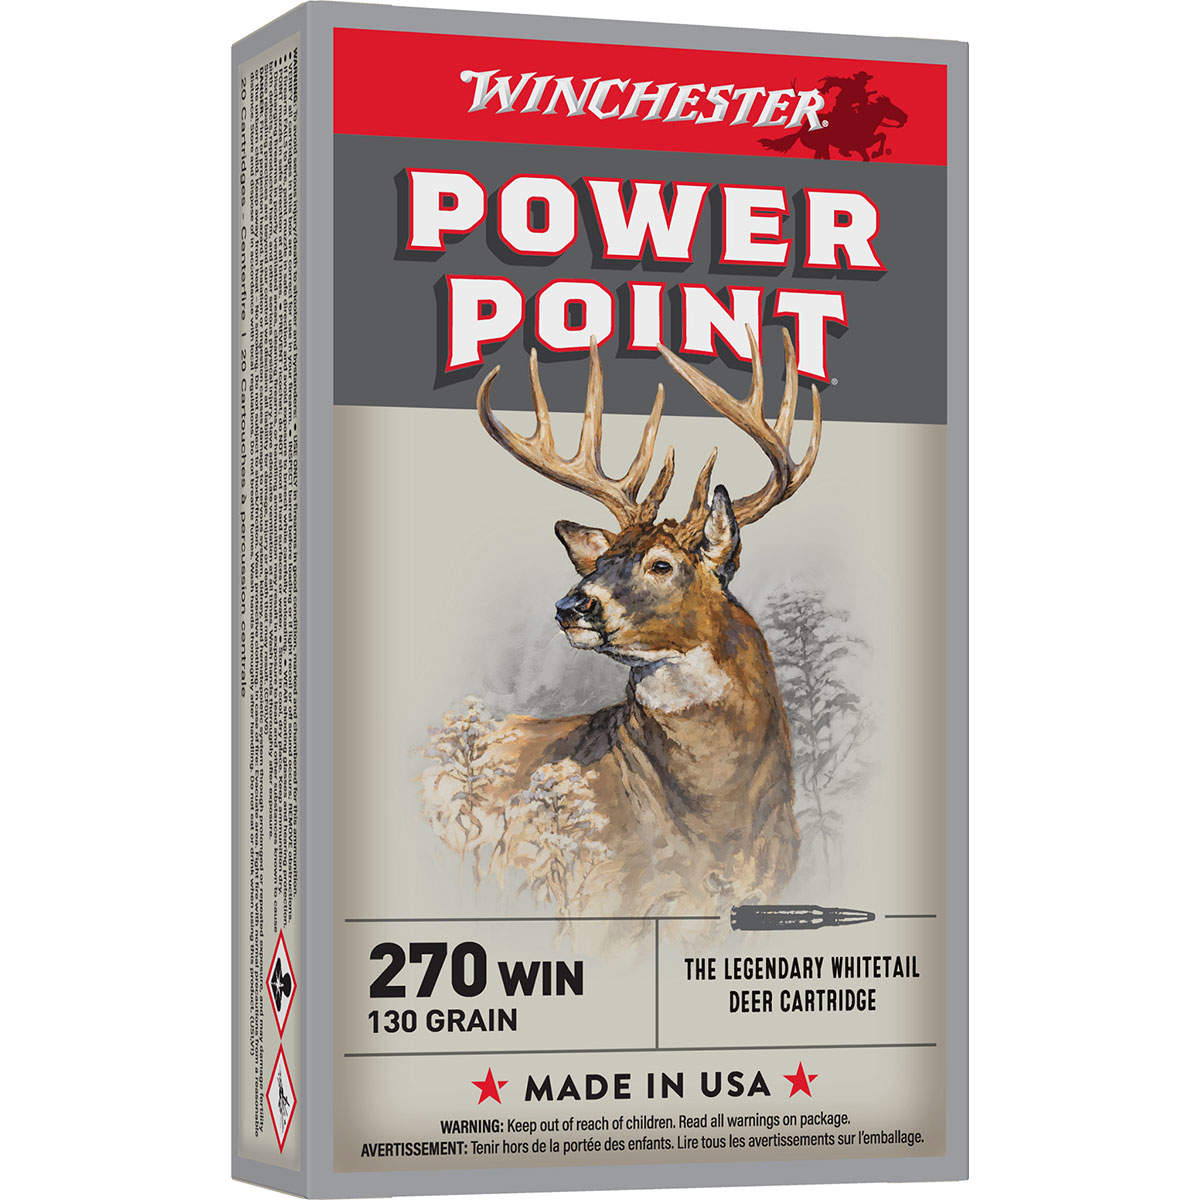 WINCHESTER - POWER POINT 270 WINCHESTER RIFLE AMMO